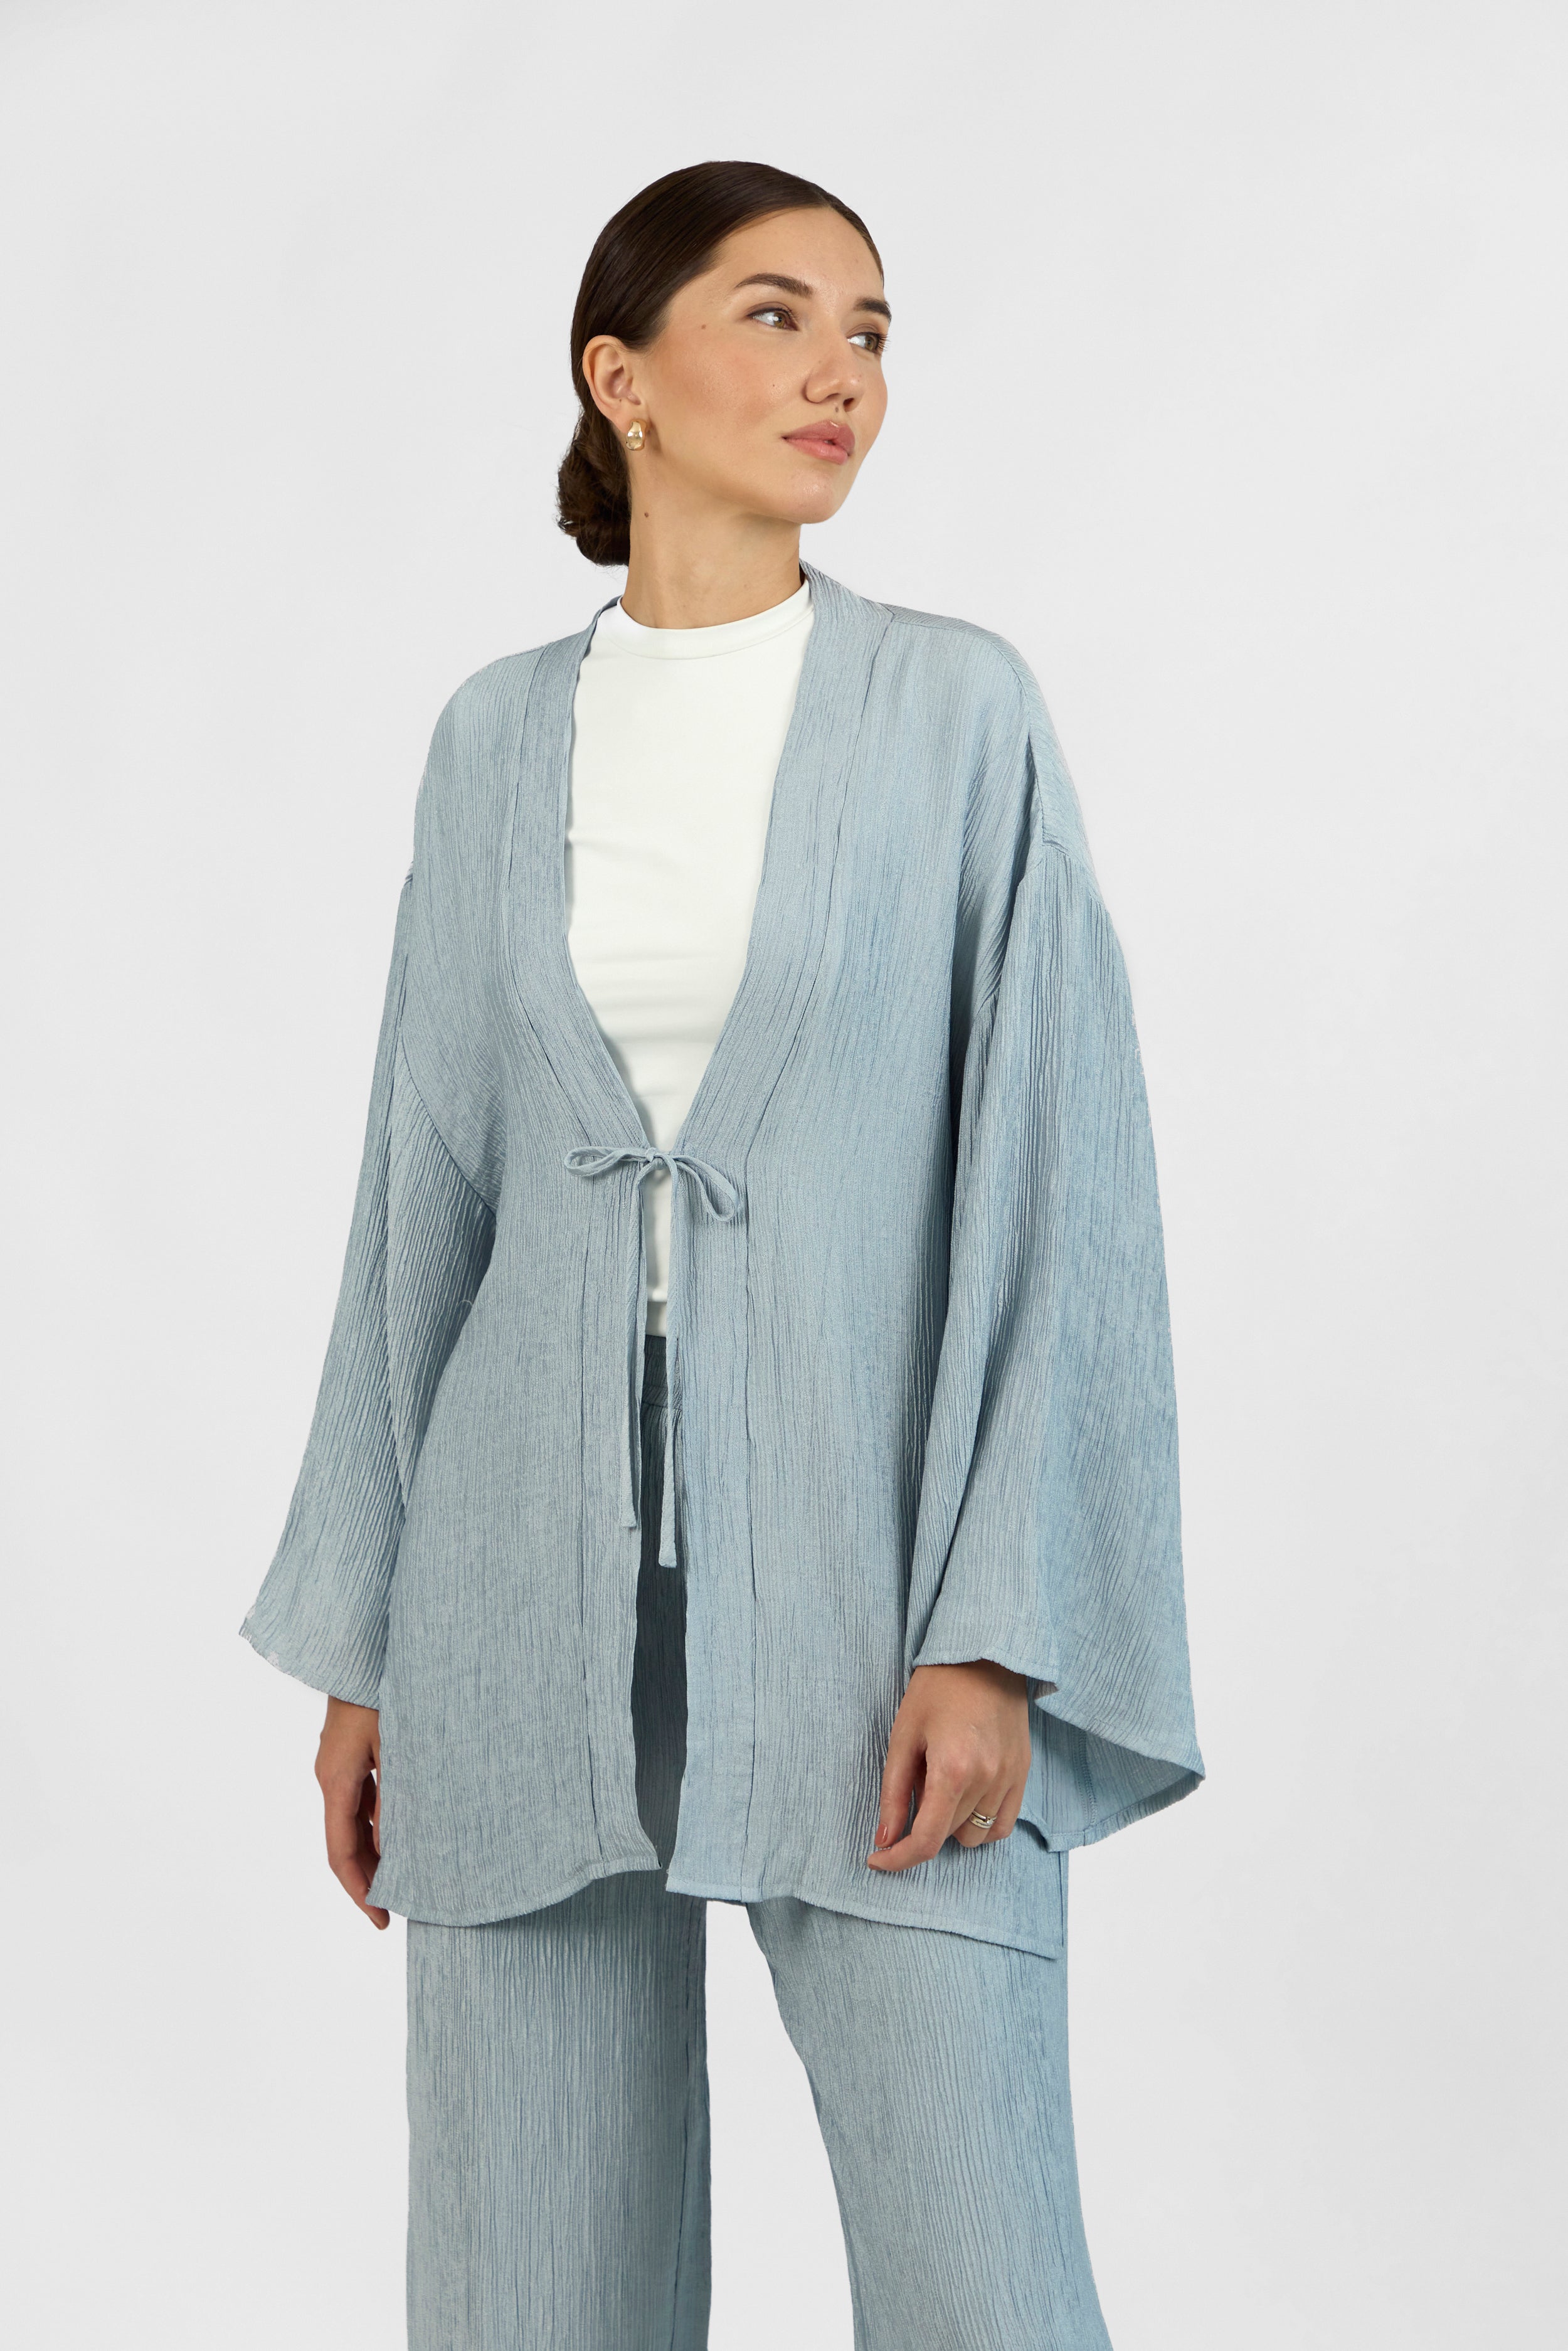 CA - Bow Detail Cardigan - Icy Blue